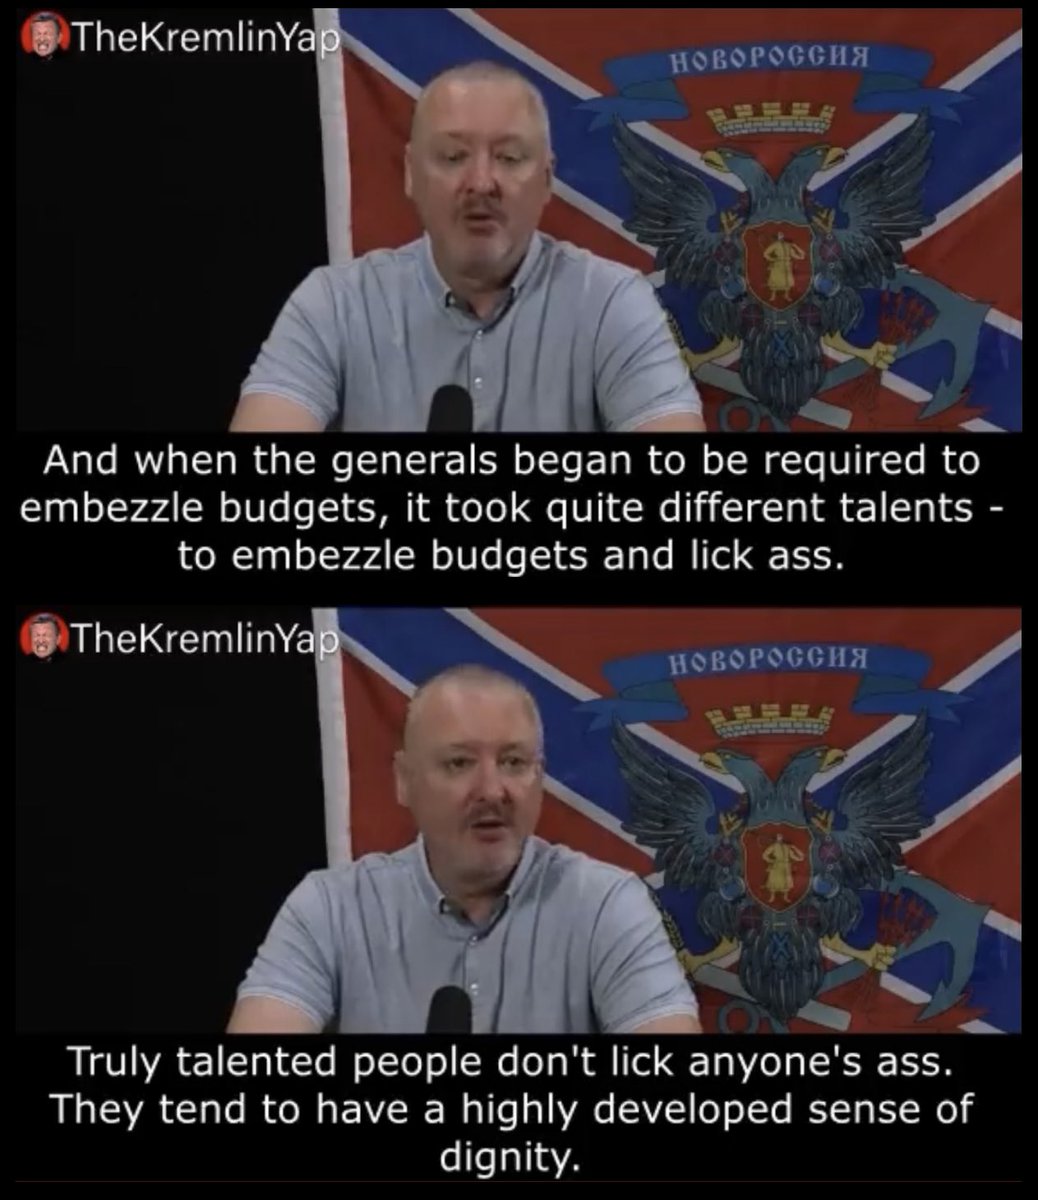 Girkin on the new requirement for Generals in the Russian Military.

“Embezzle budgets and lick as*”